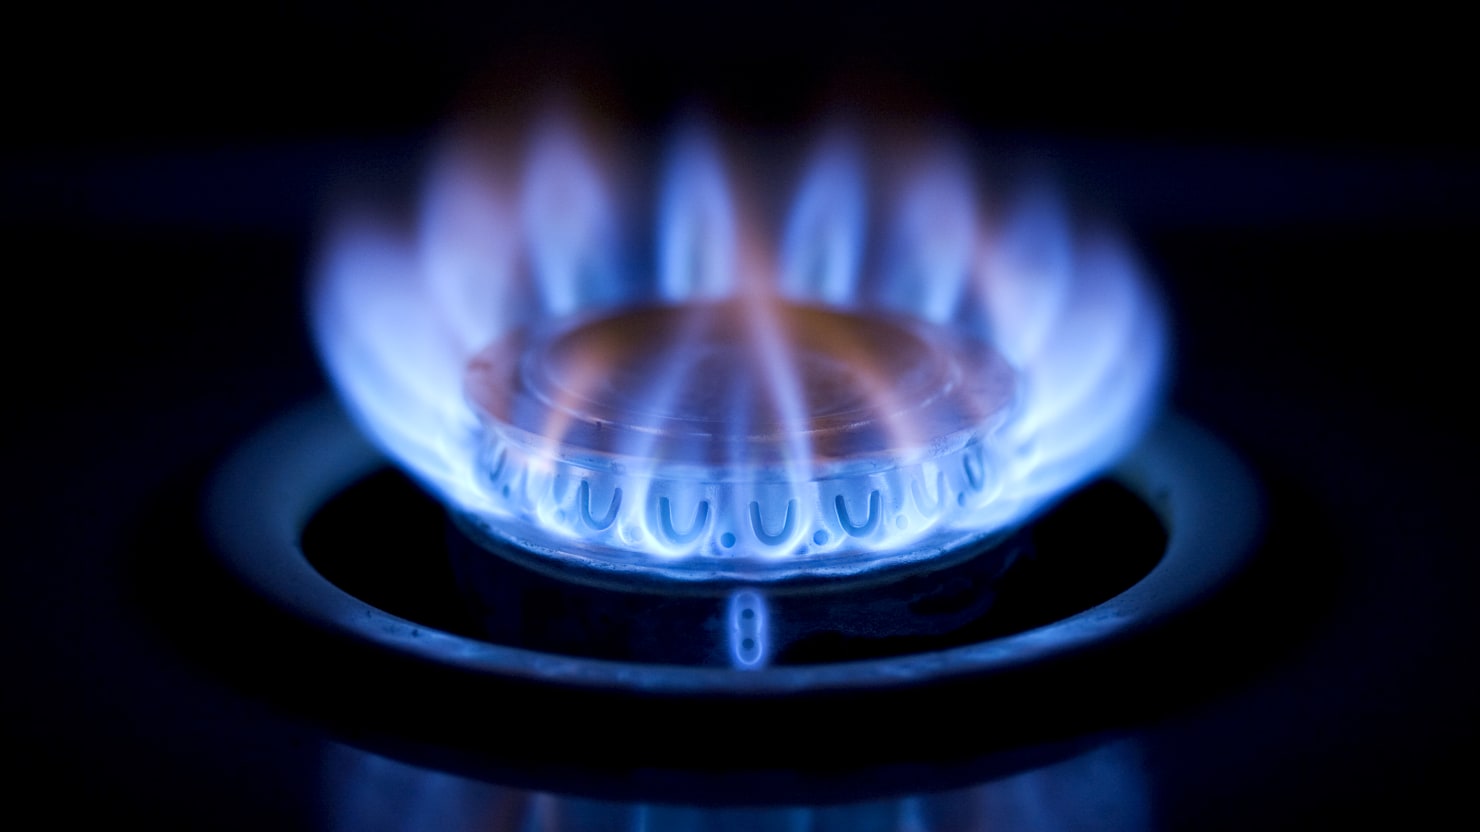 Can Gas Stoves Make You Sick?